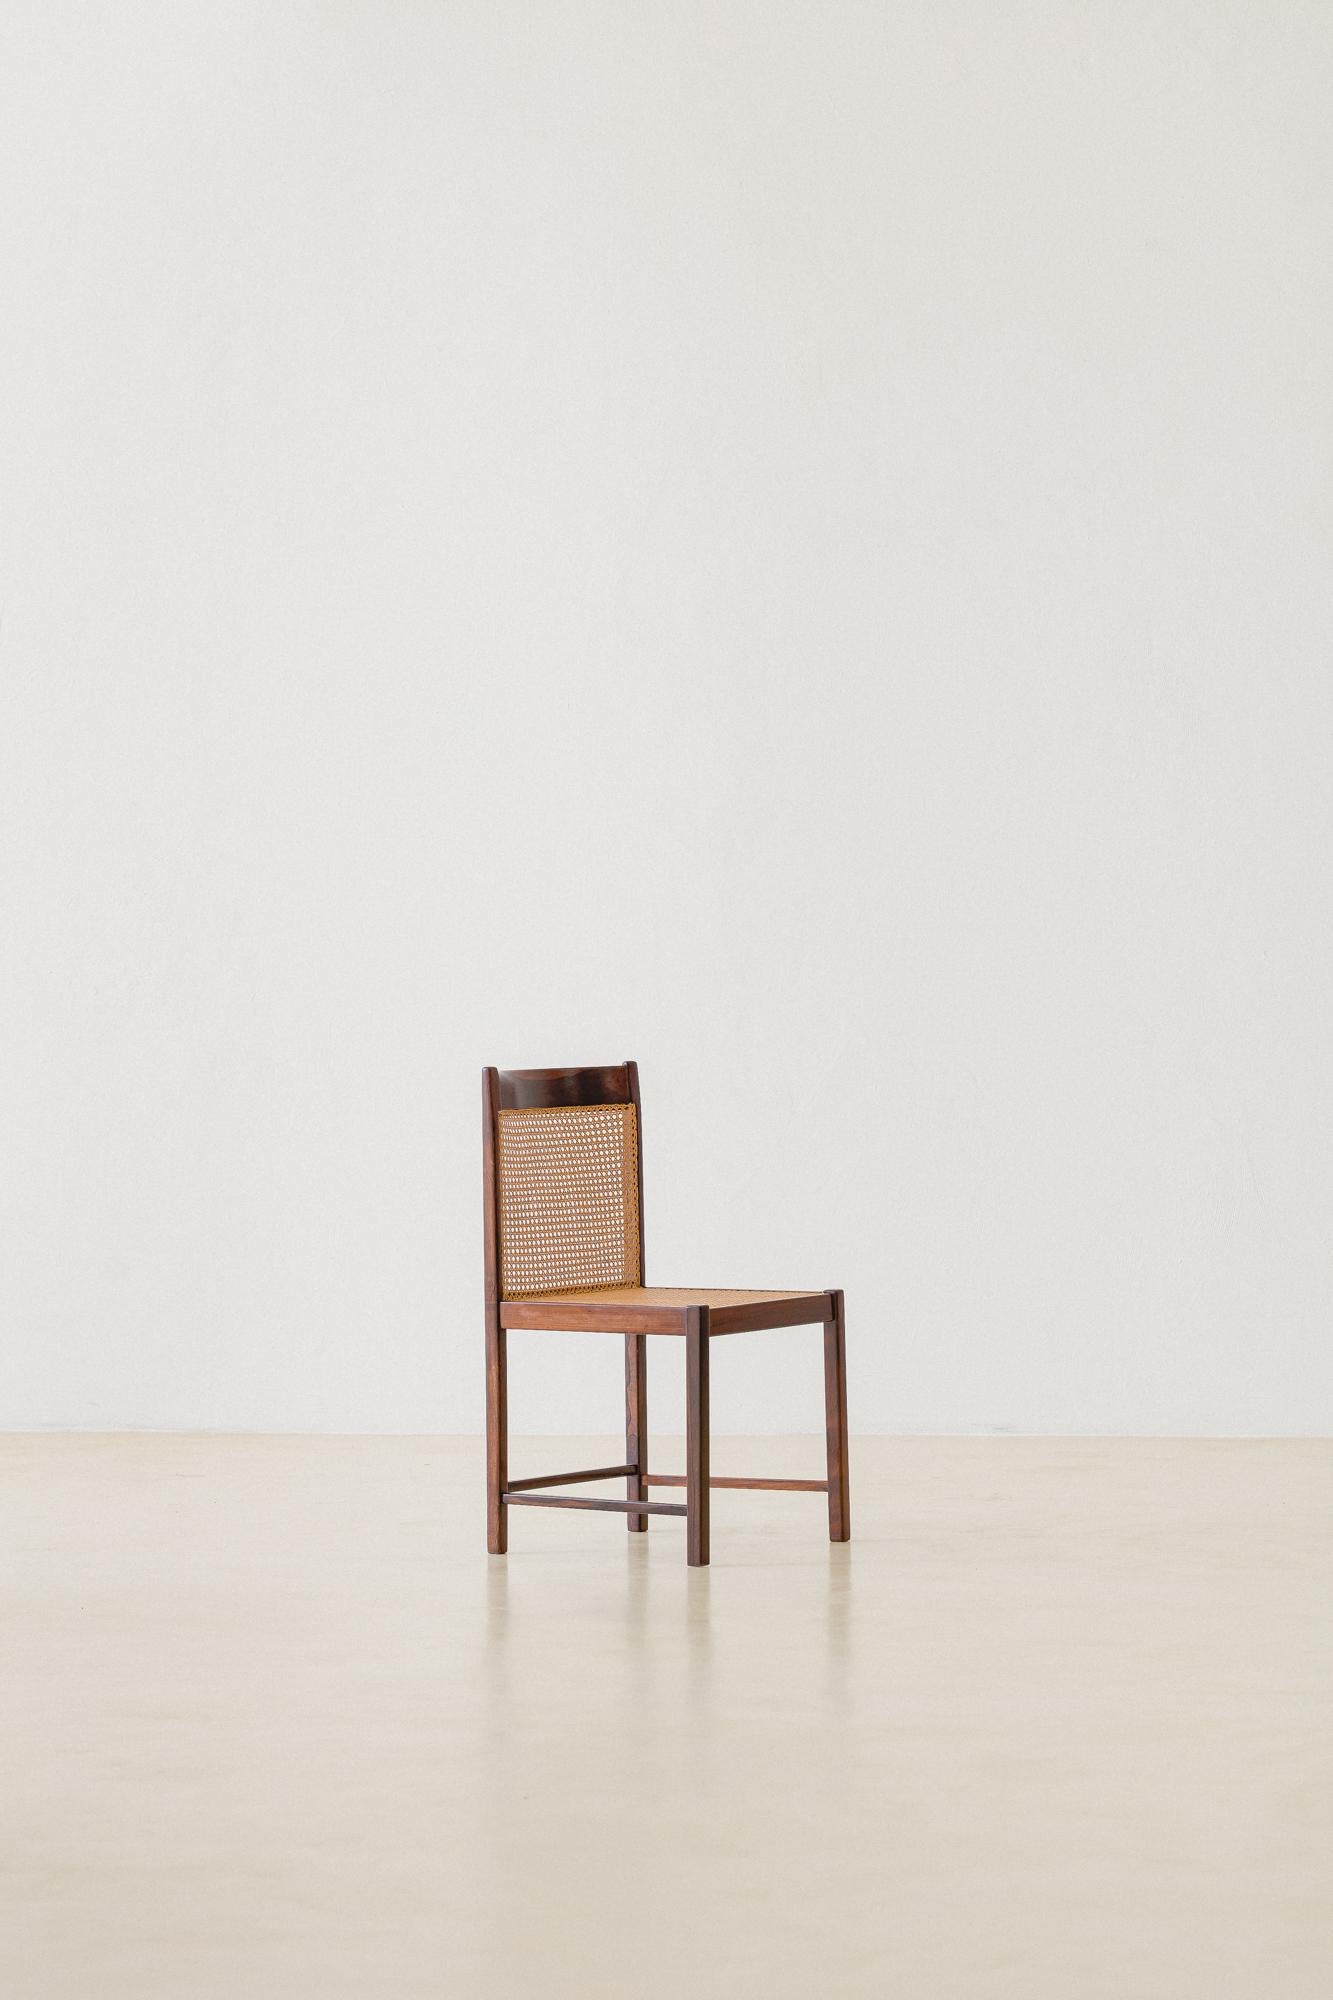 Brazilian Rosewood Dining Chairs by Fatima Arquitetura Interiores 'FAI', 1960s For Sale 1